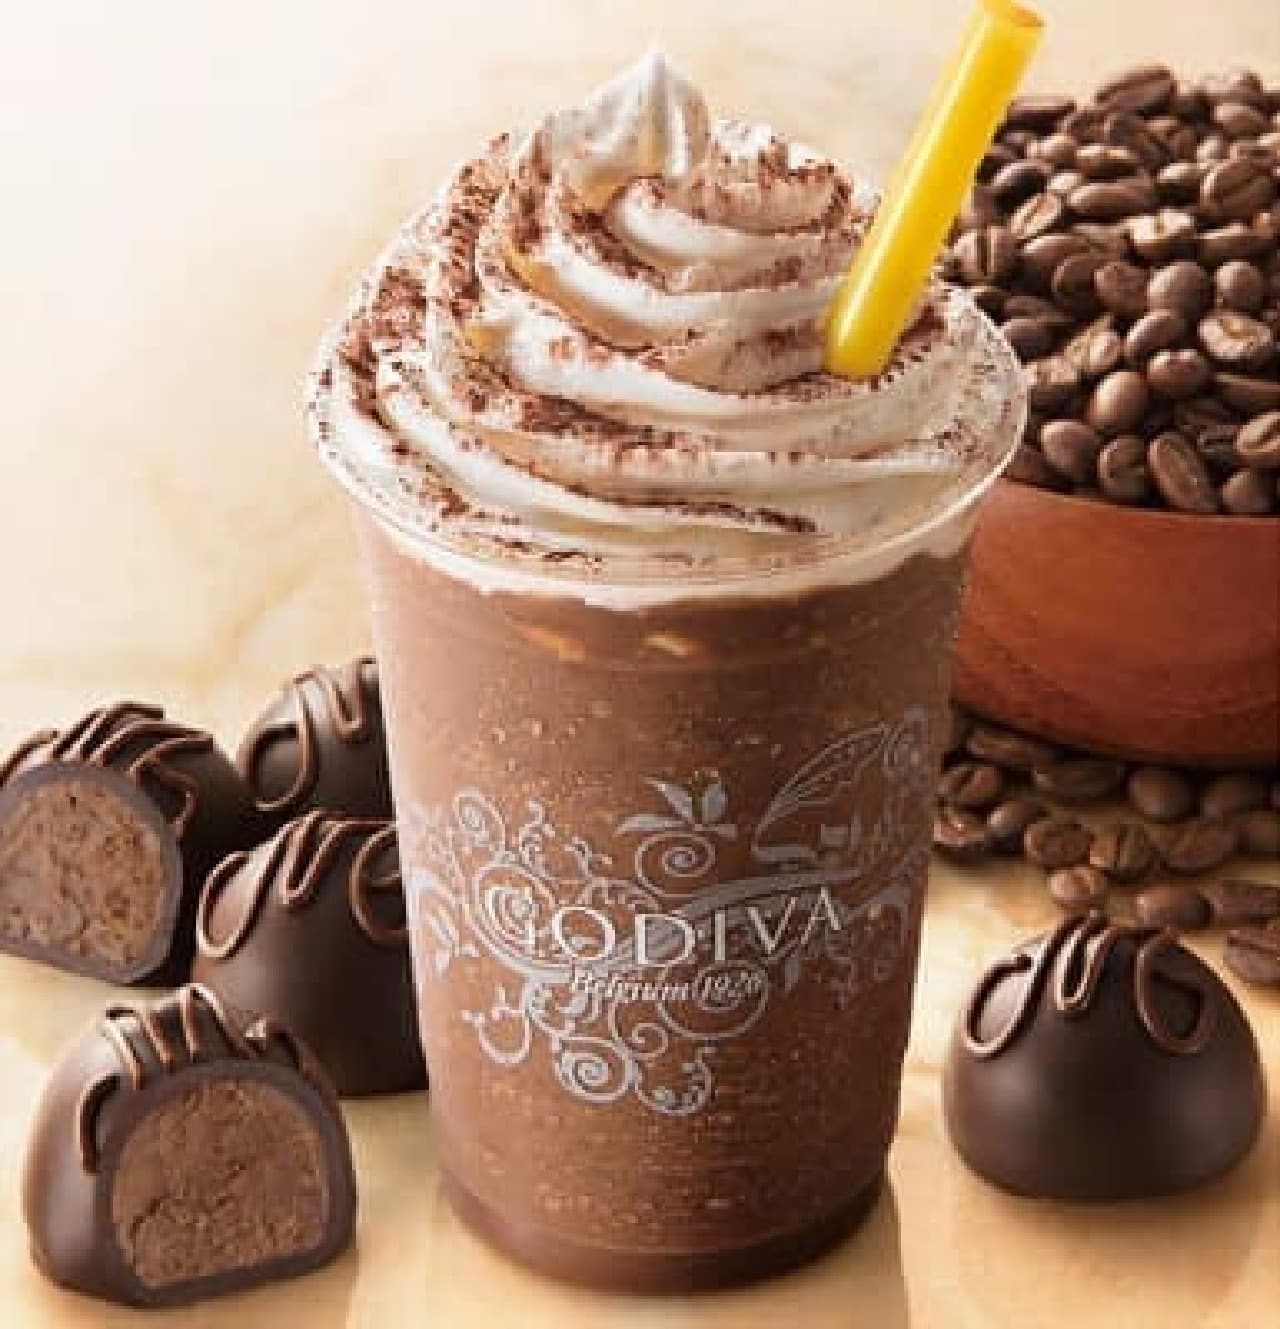 Introducing a new chocolate drink from Godiva!